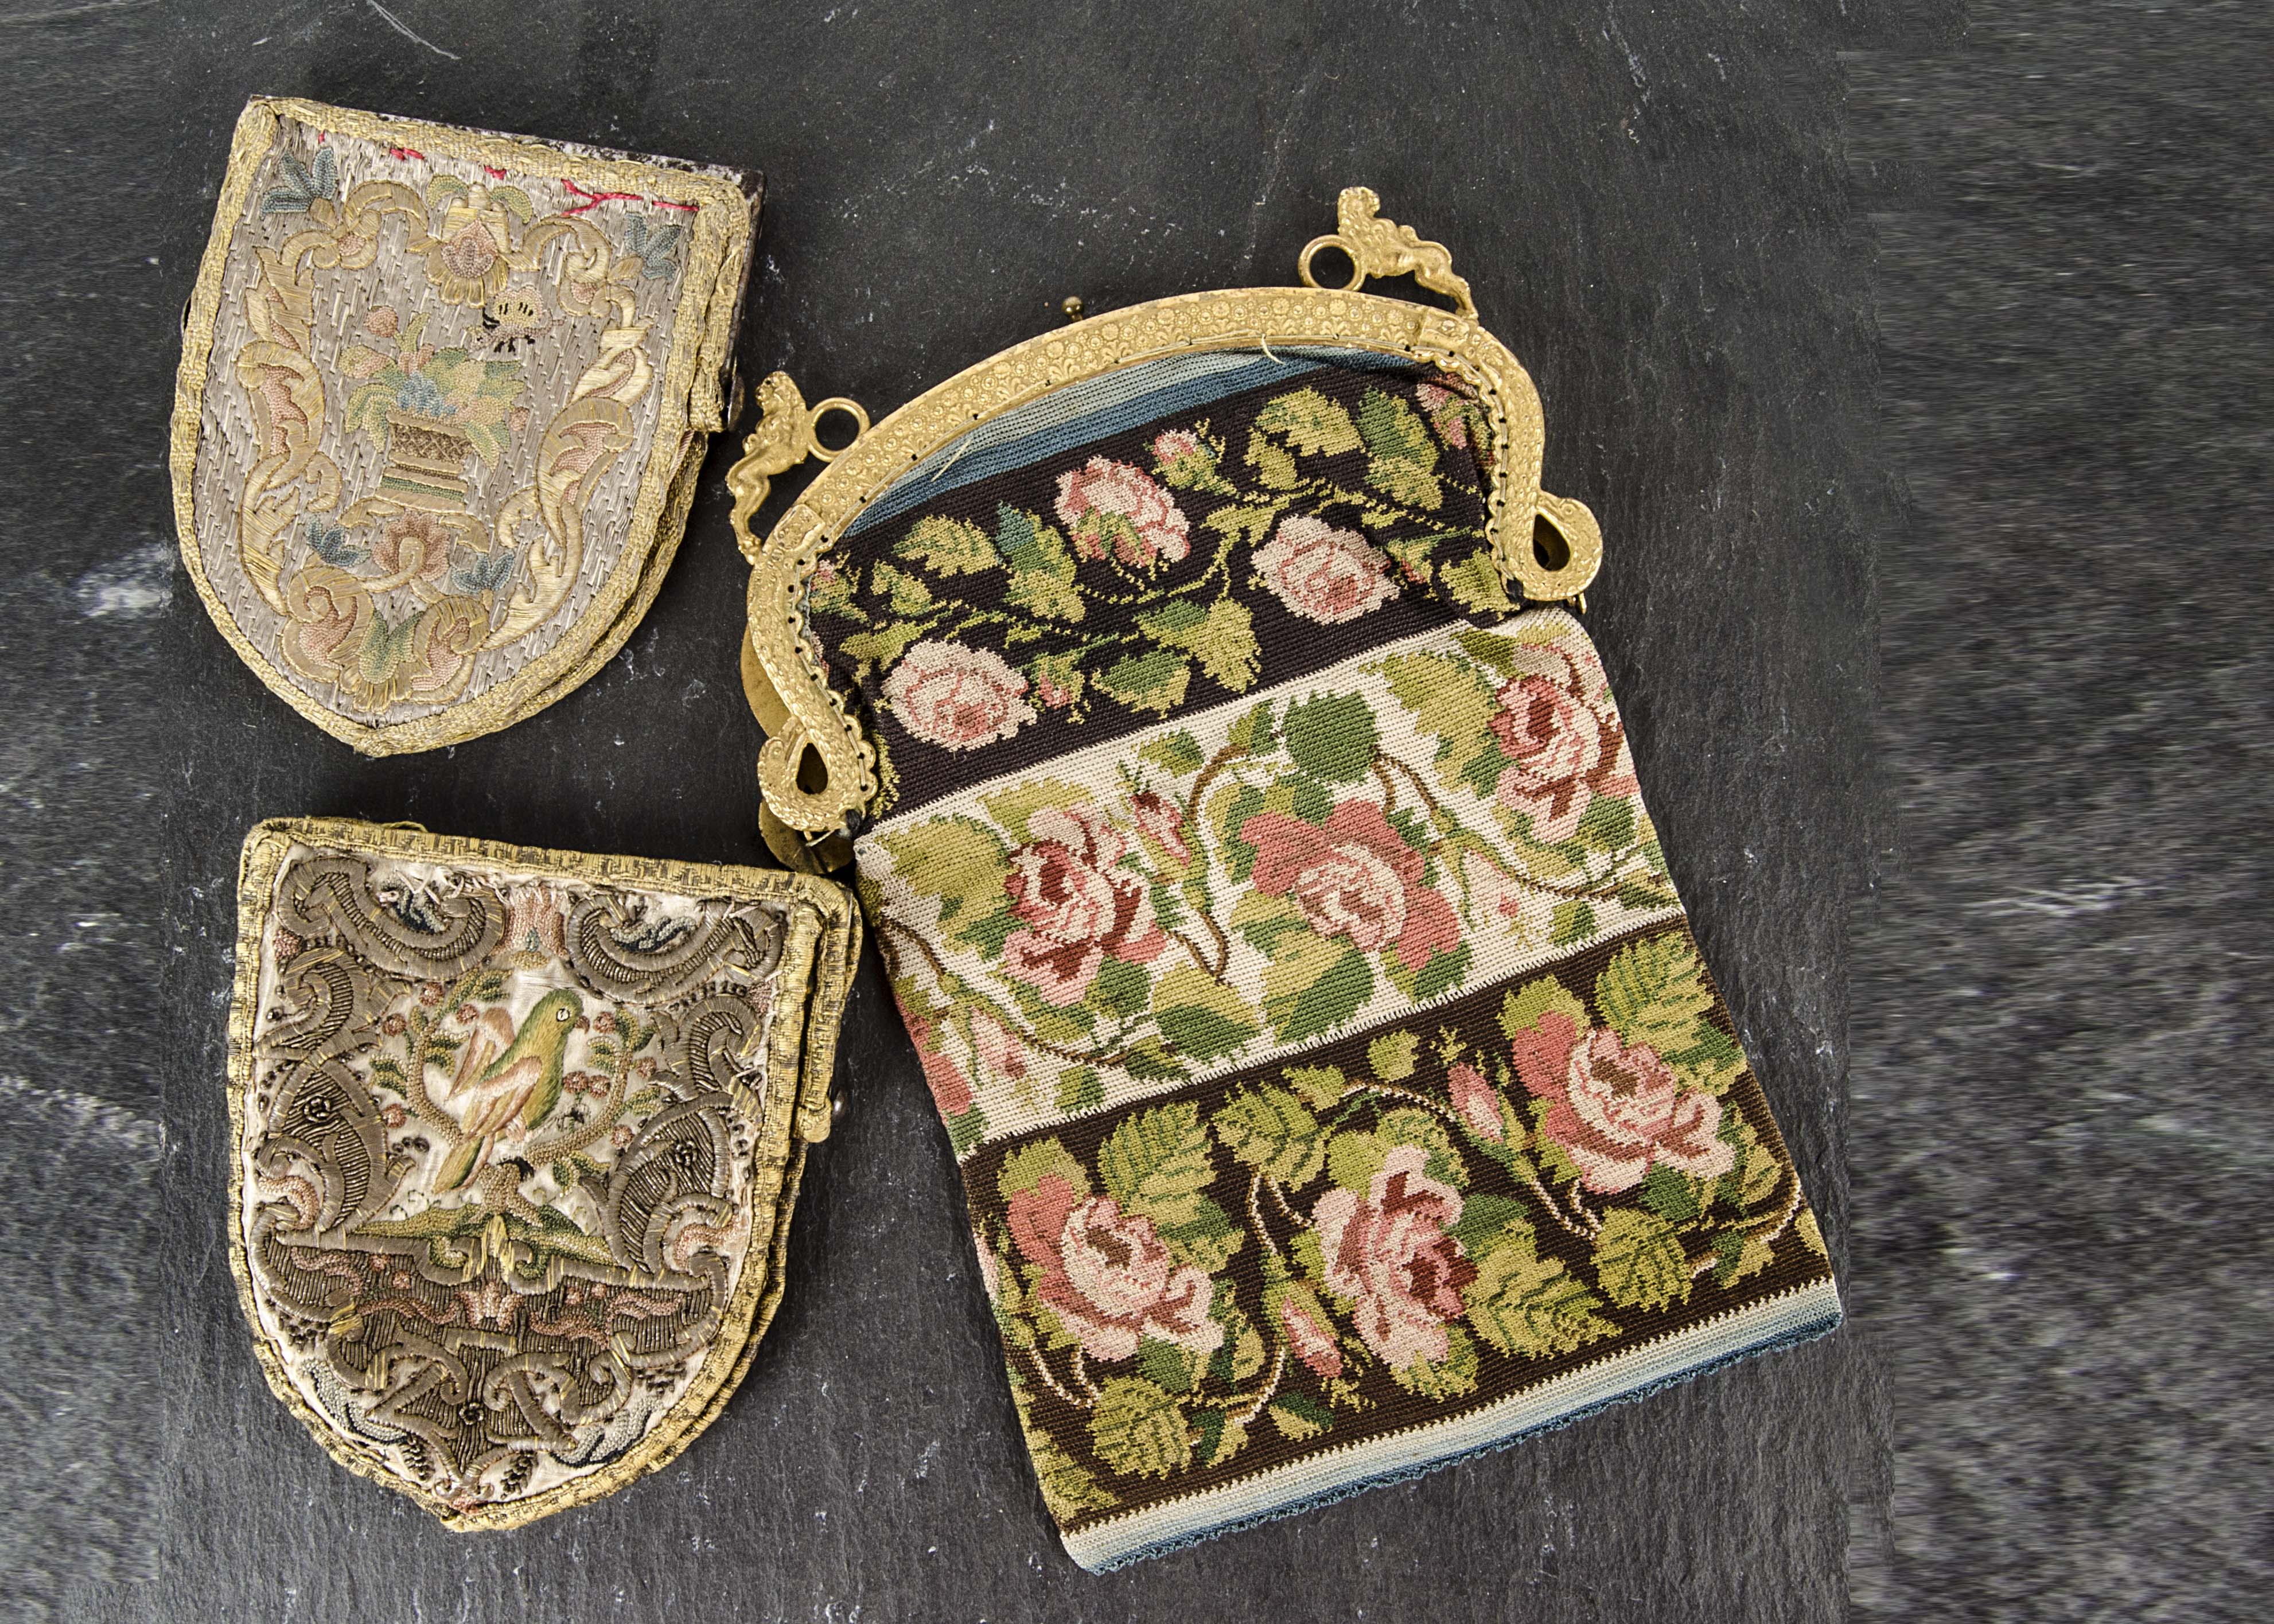 Three embroidered purses, two shield shaped with birds and flowers circa 1790 and a button holed reticule, mid 19th century